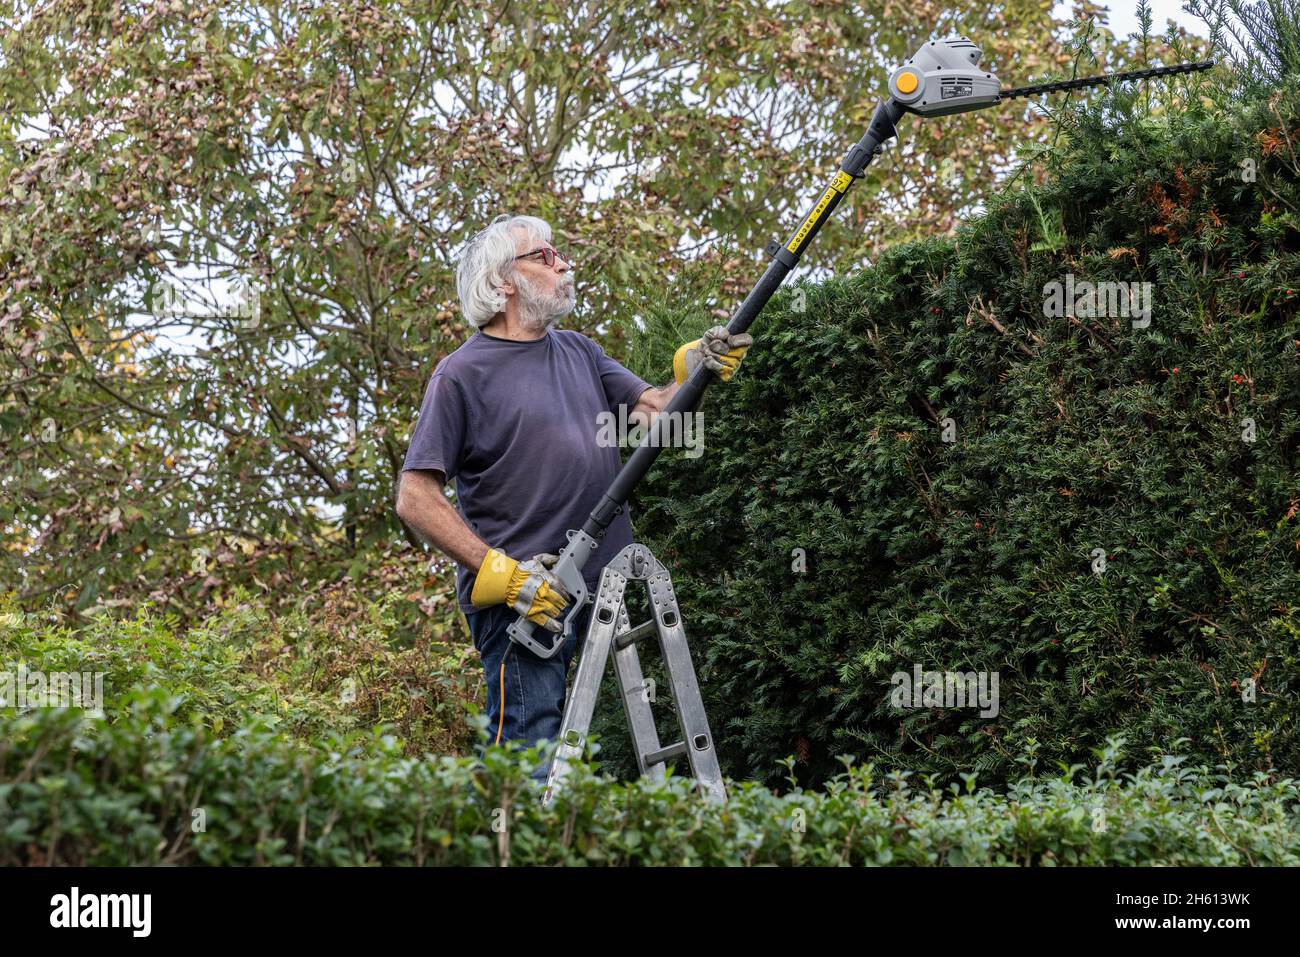 A bearded man clipping the hedge of his residential garden, London, UK Stock Photo